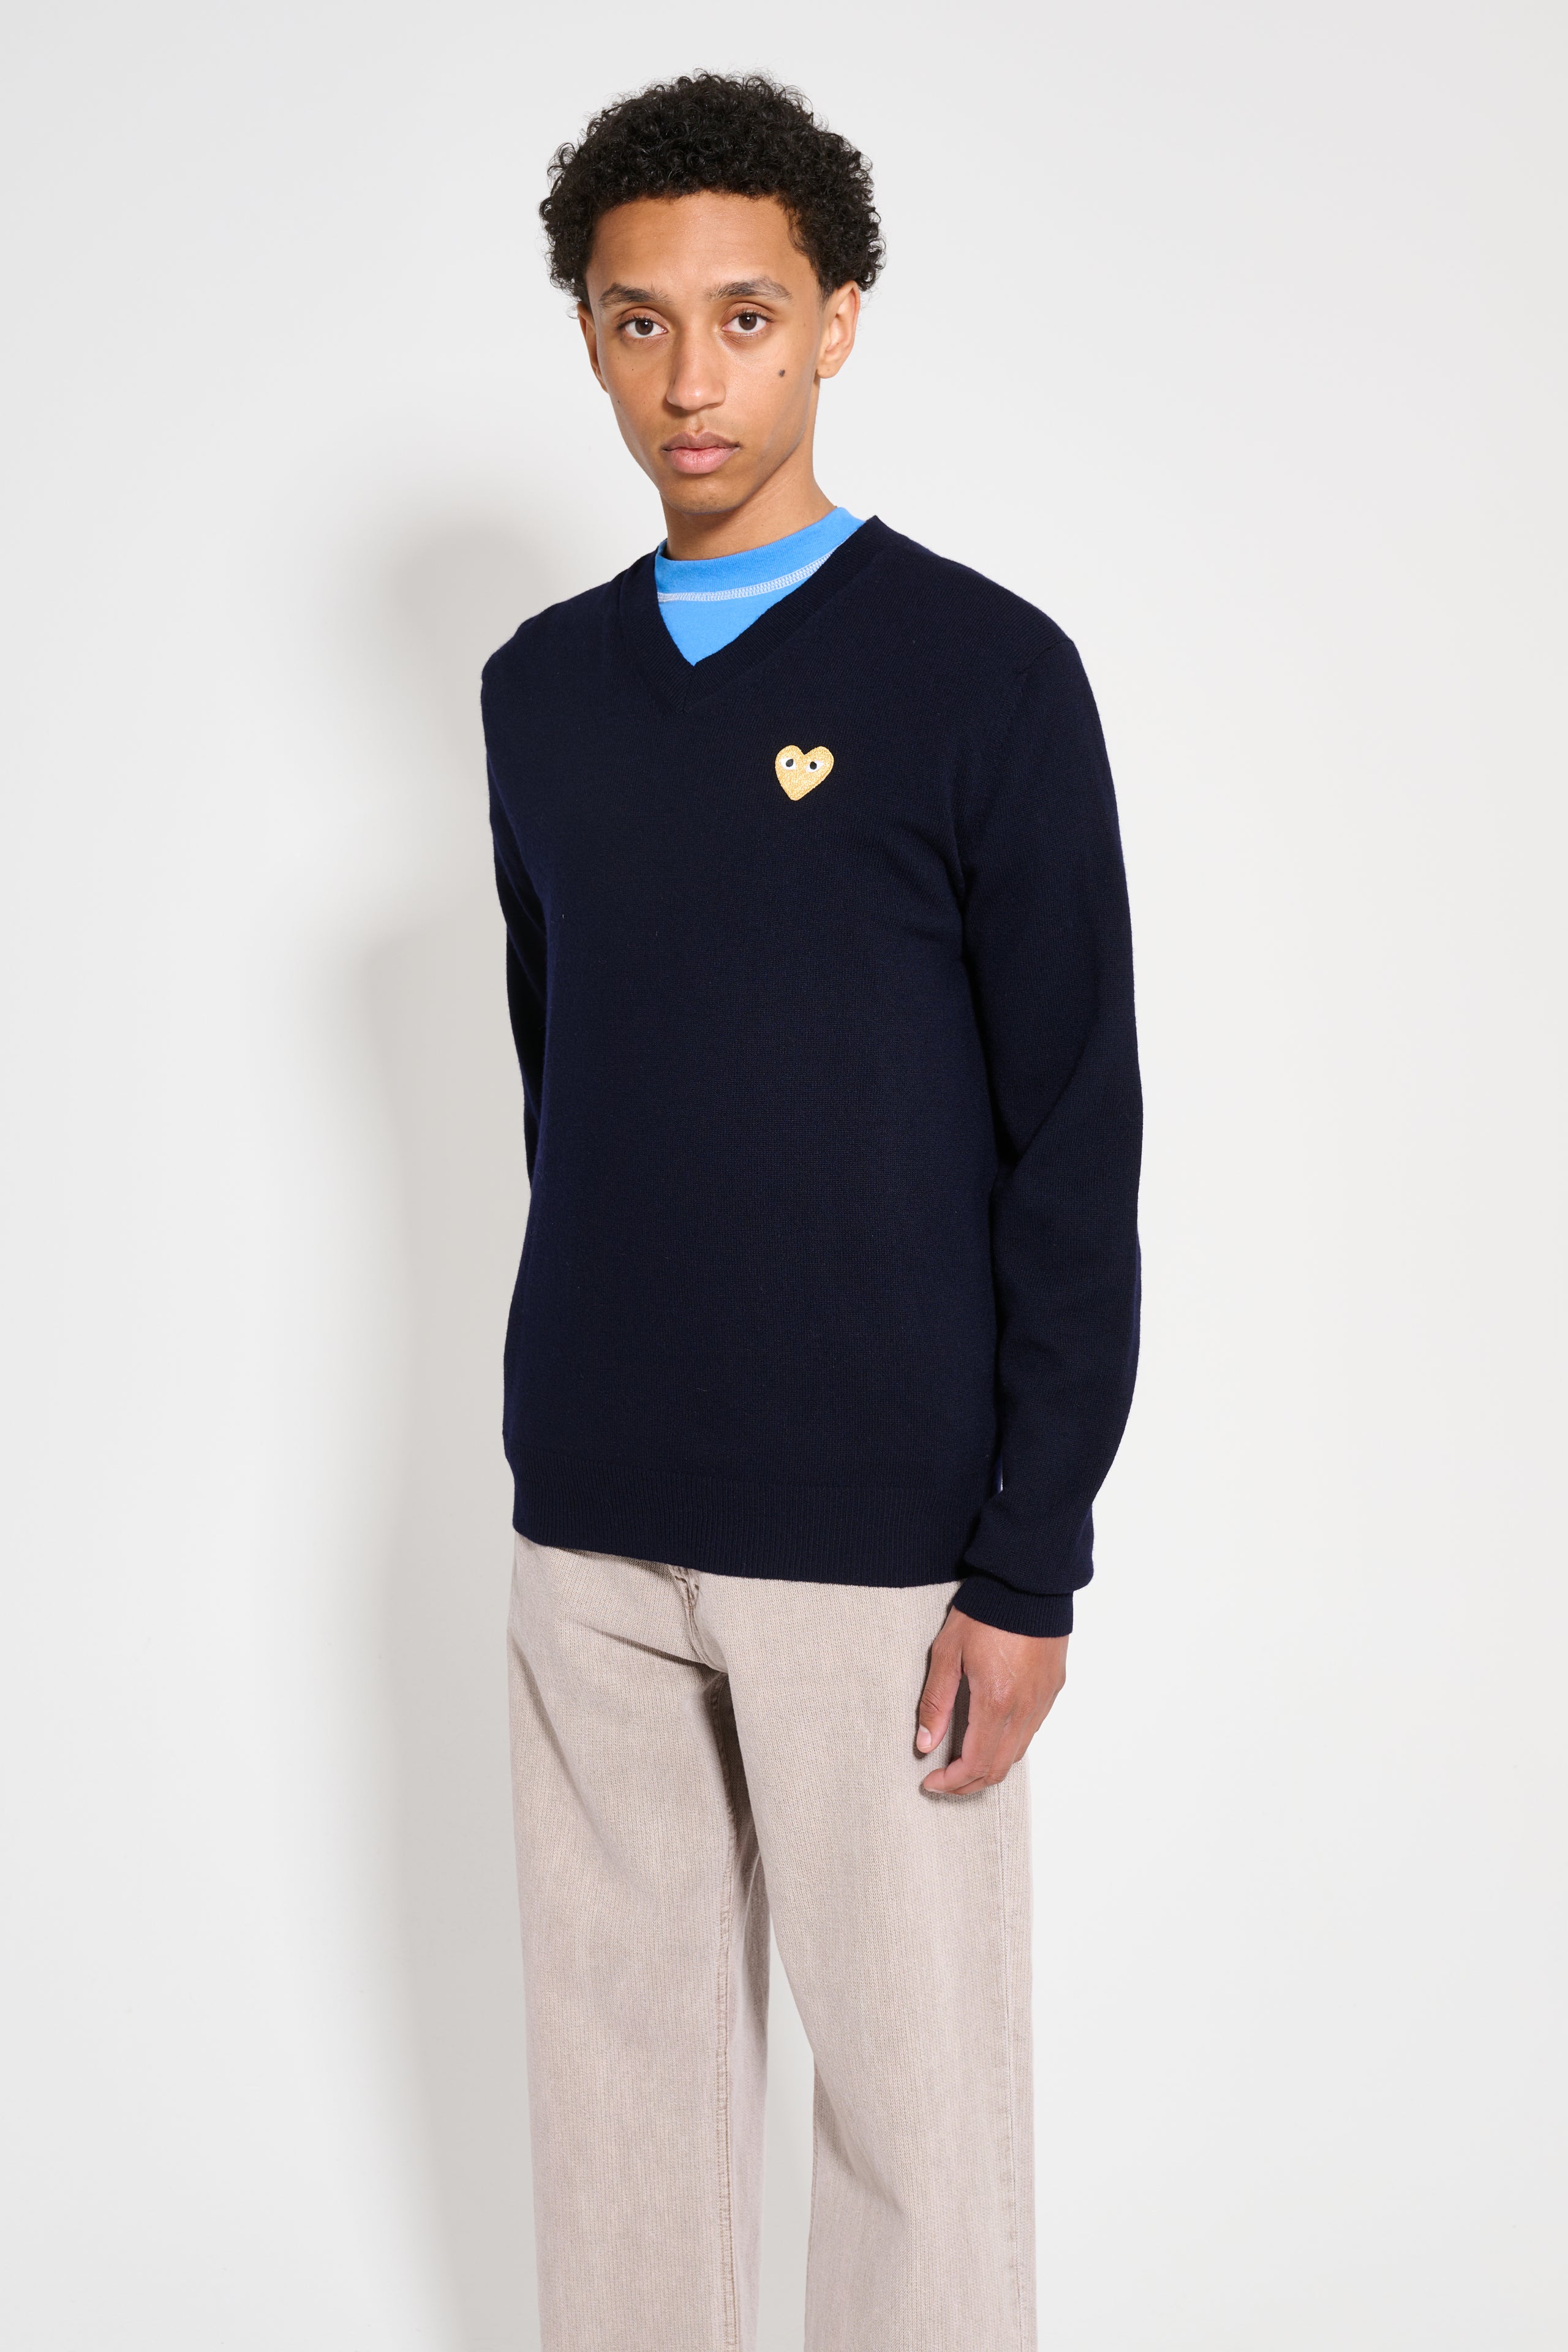 Comme des Garçons Play Small Heart Knitted V-Neck Pullover Navy